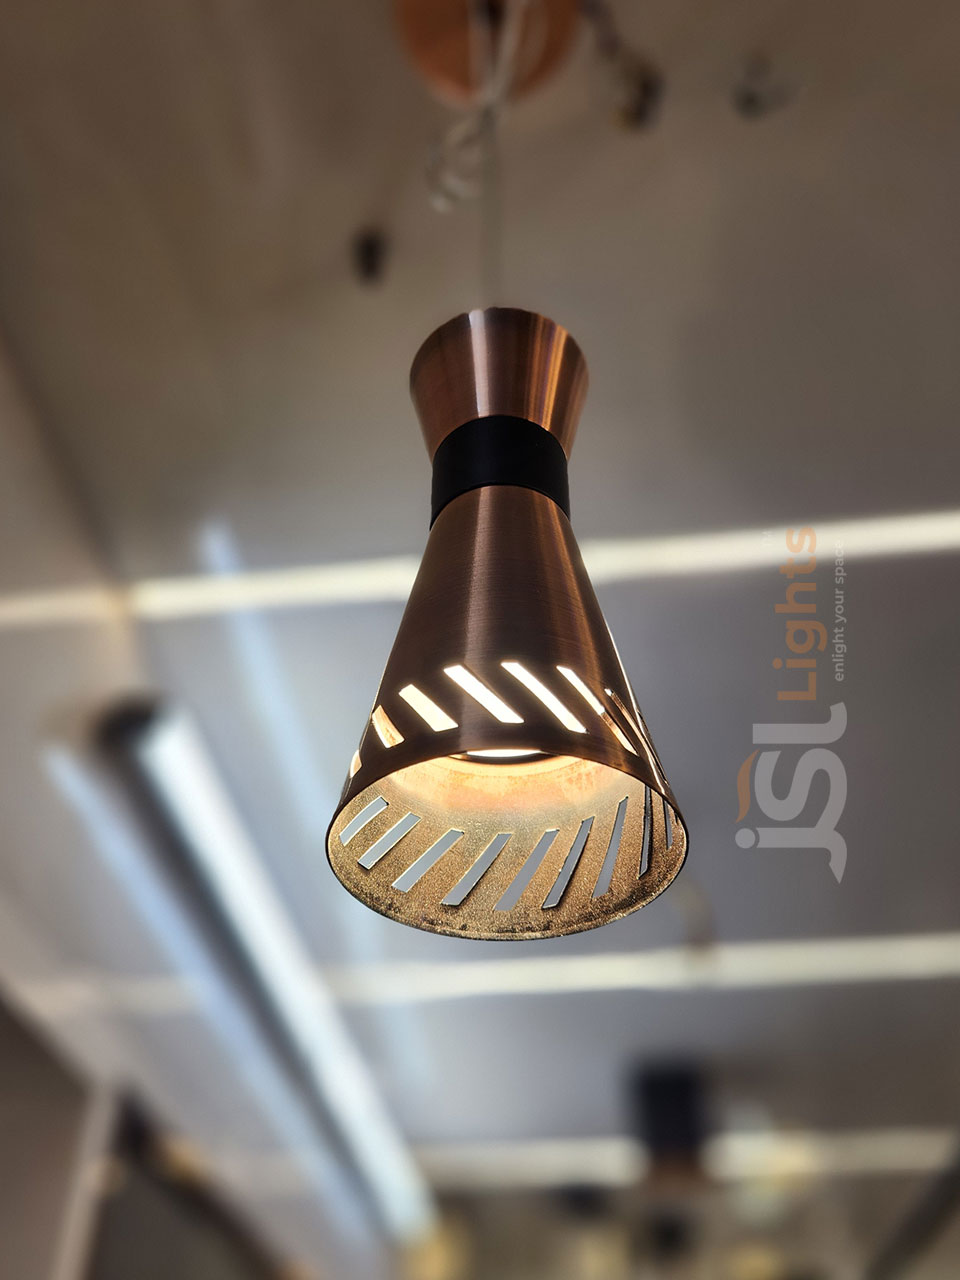 9W LX 283 Copper Surface Hanging Light for Home Ceiling Pendant Light Warm White with Hanging Wire